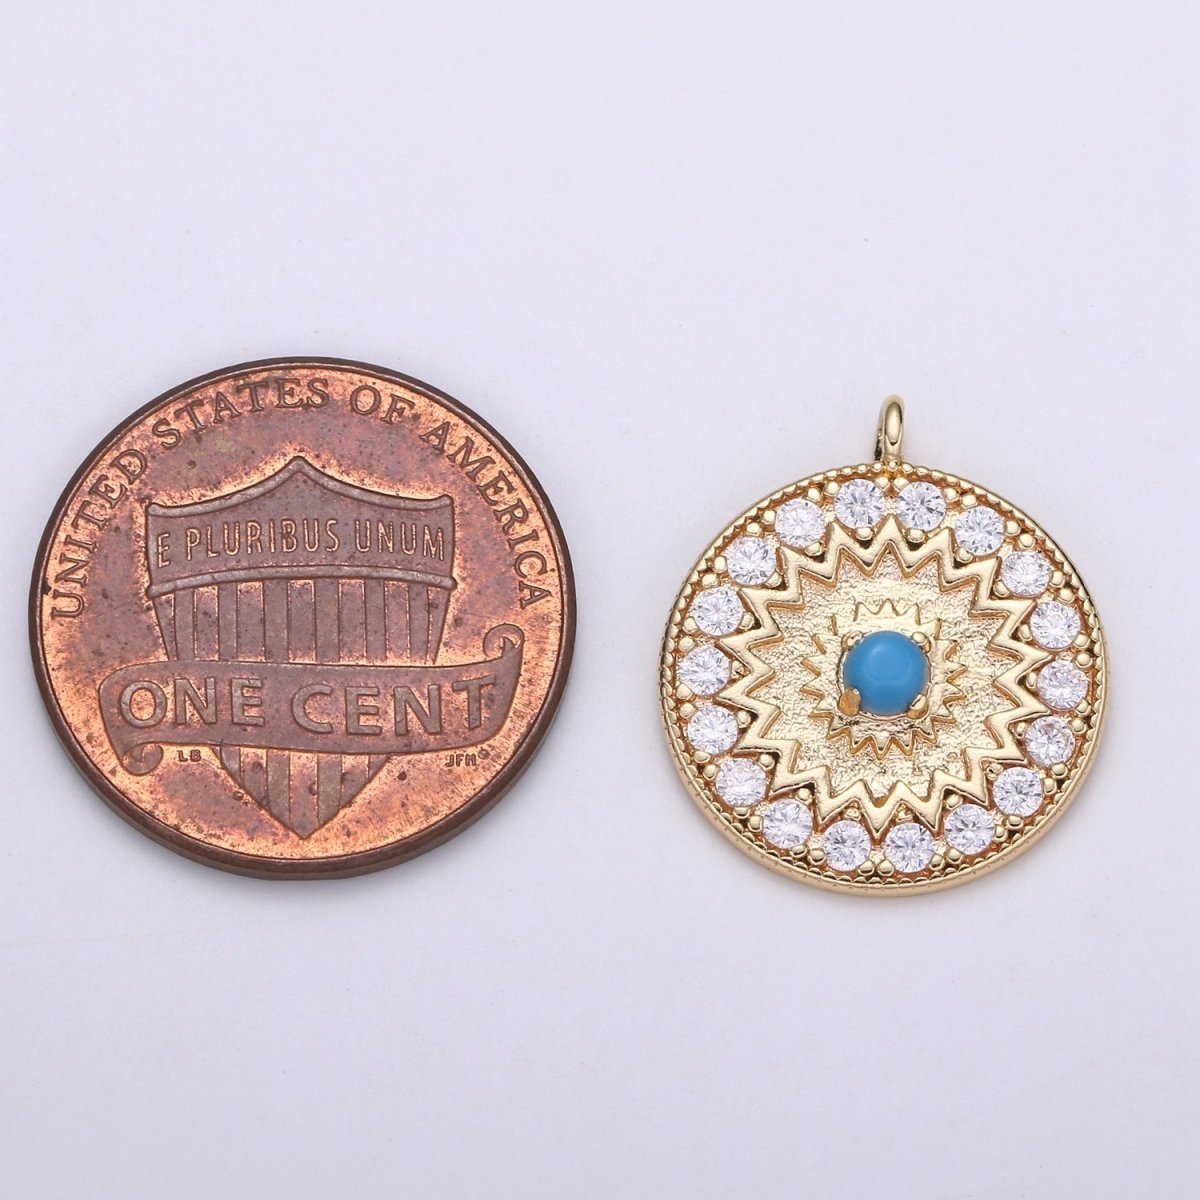 18k Gold Filled Round Micro Pave Charm Turquoise Pendant, MoonStone charms for Medallion necklace Component Supply Jewelry Making E-142 E-143 - DLUXCA